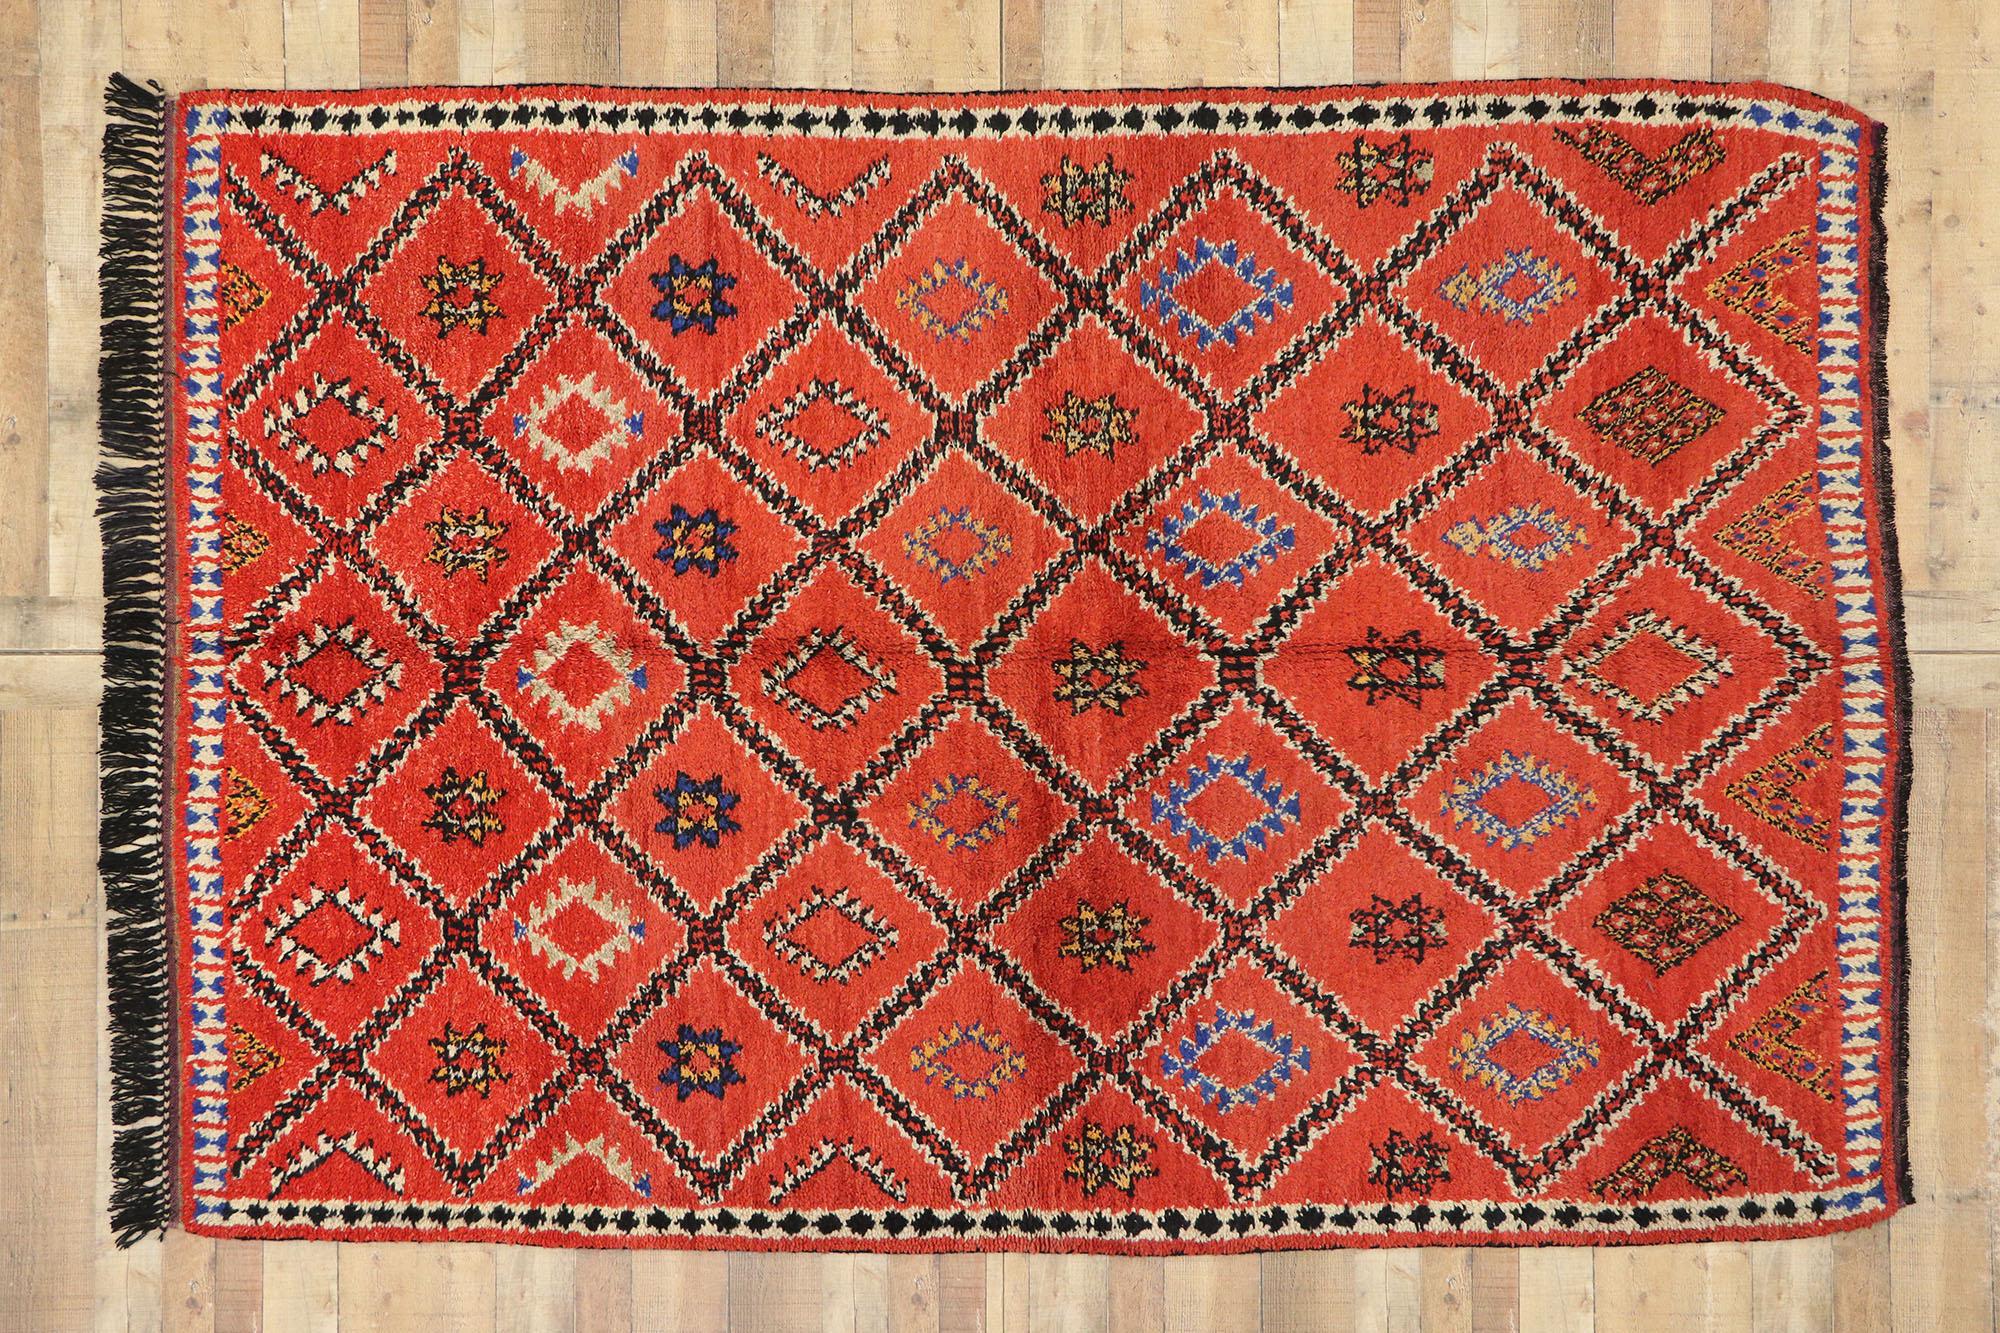 20th Century Vintage Berber Red Moroccan Rug with Modern Northwestern Tribal Style